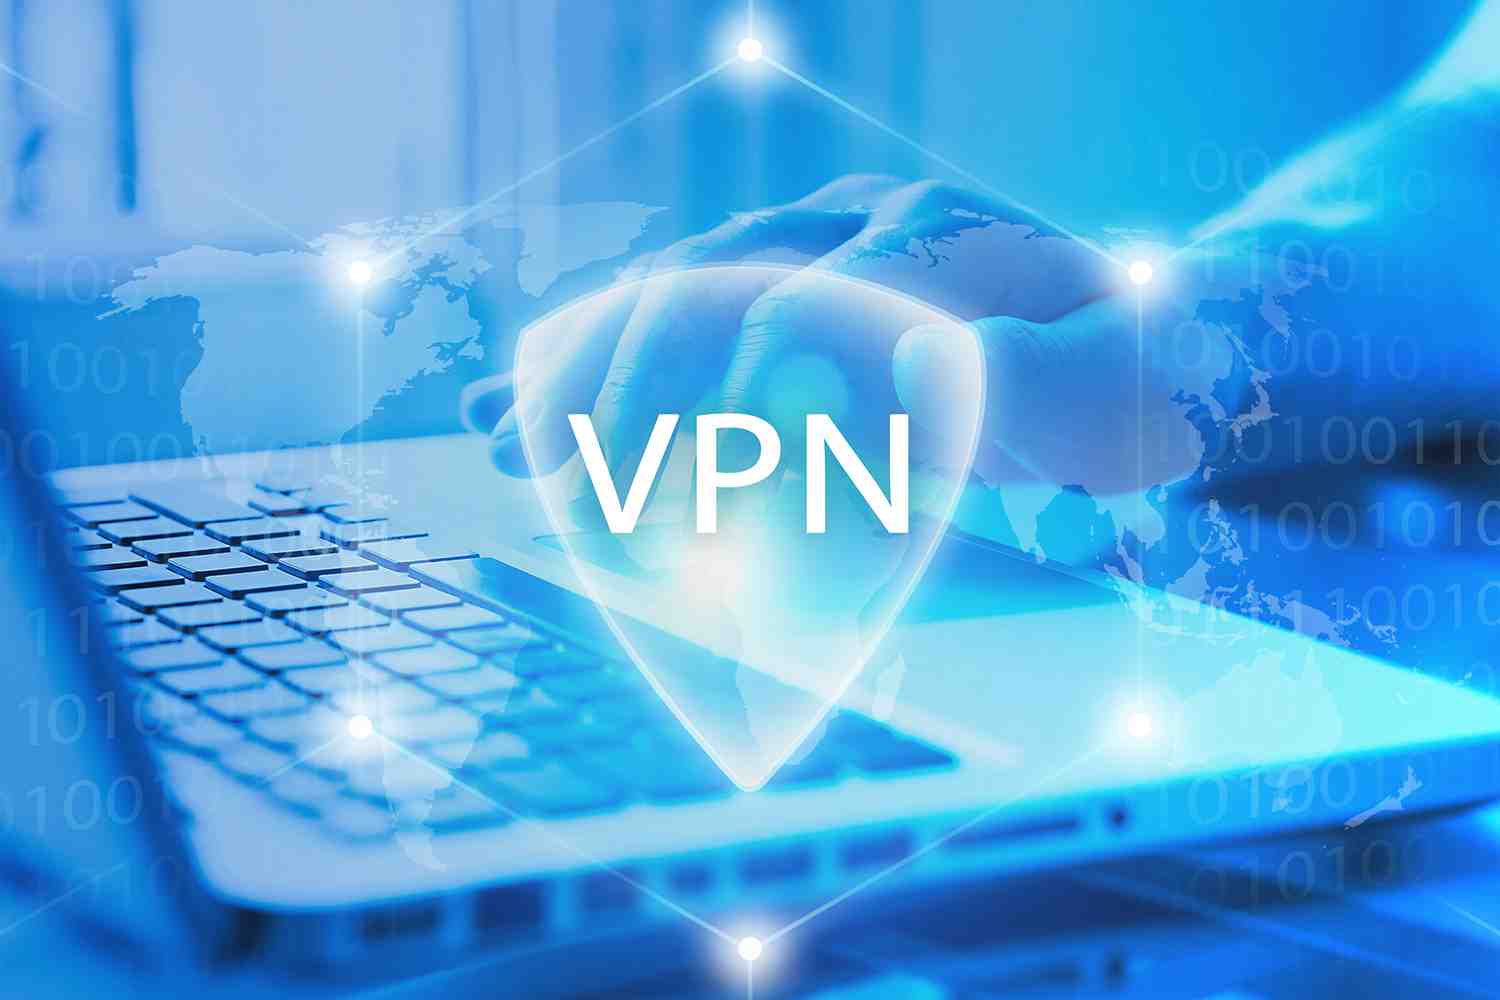 How do I switch off VPN on iPhone?